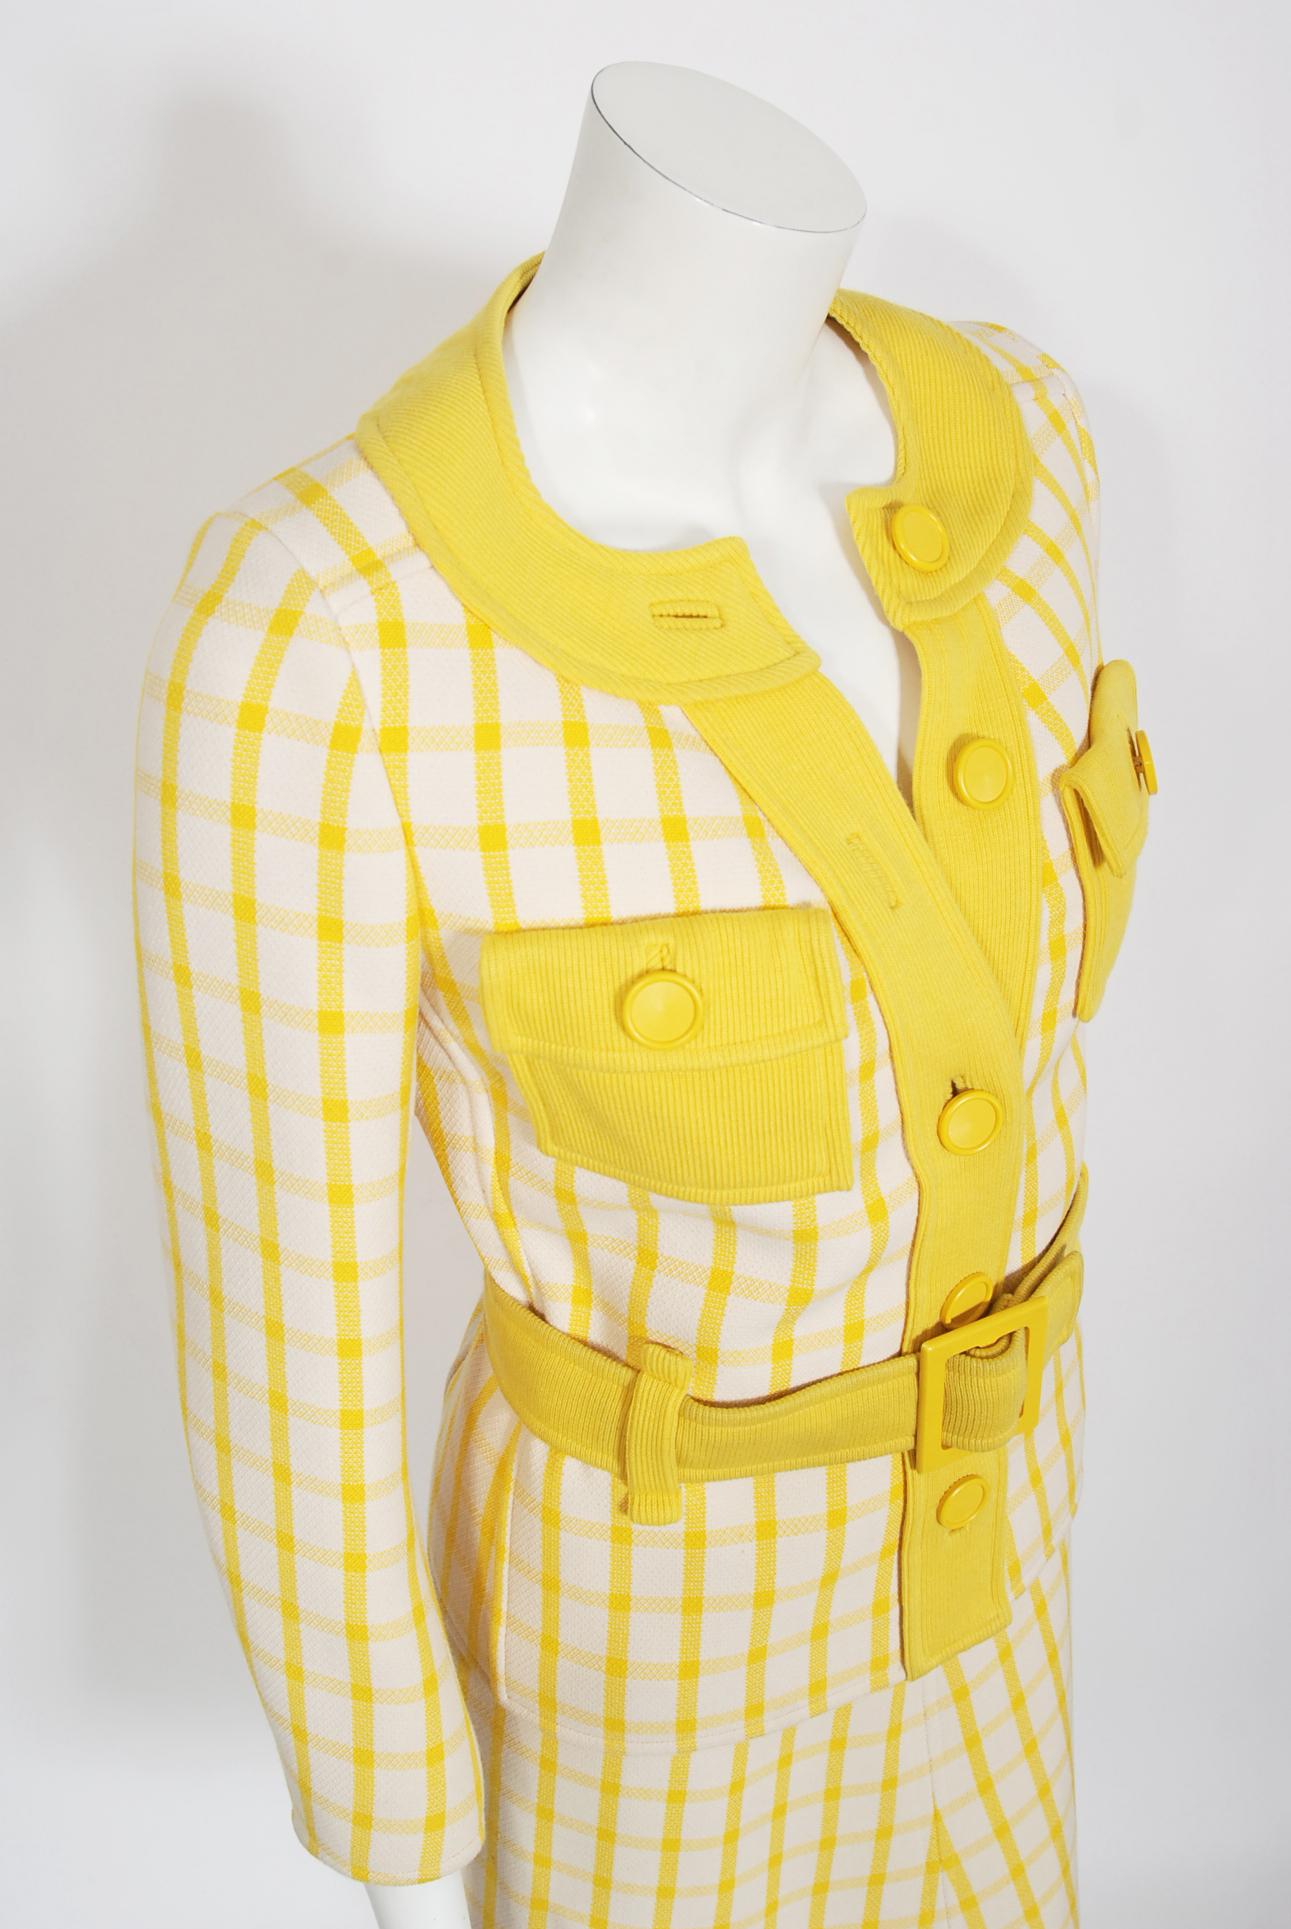 Orange Vintage 1967 Courreges Couture Yellow White Checkered Wool Belted Jacket & Skirt For Sale